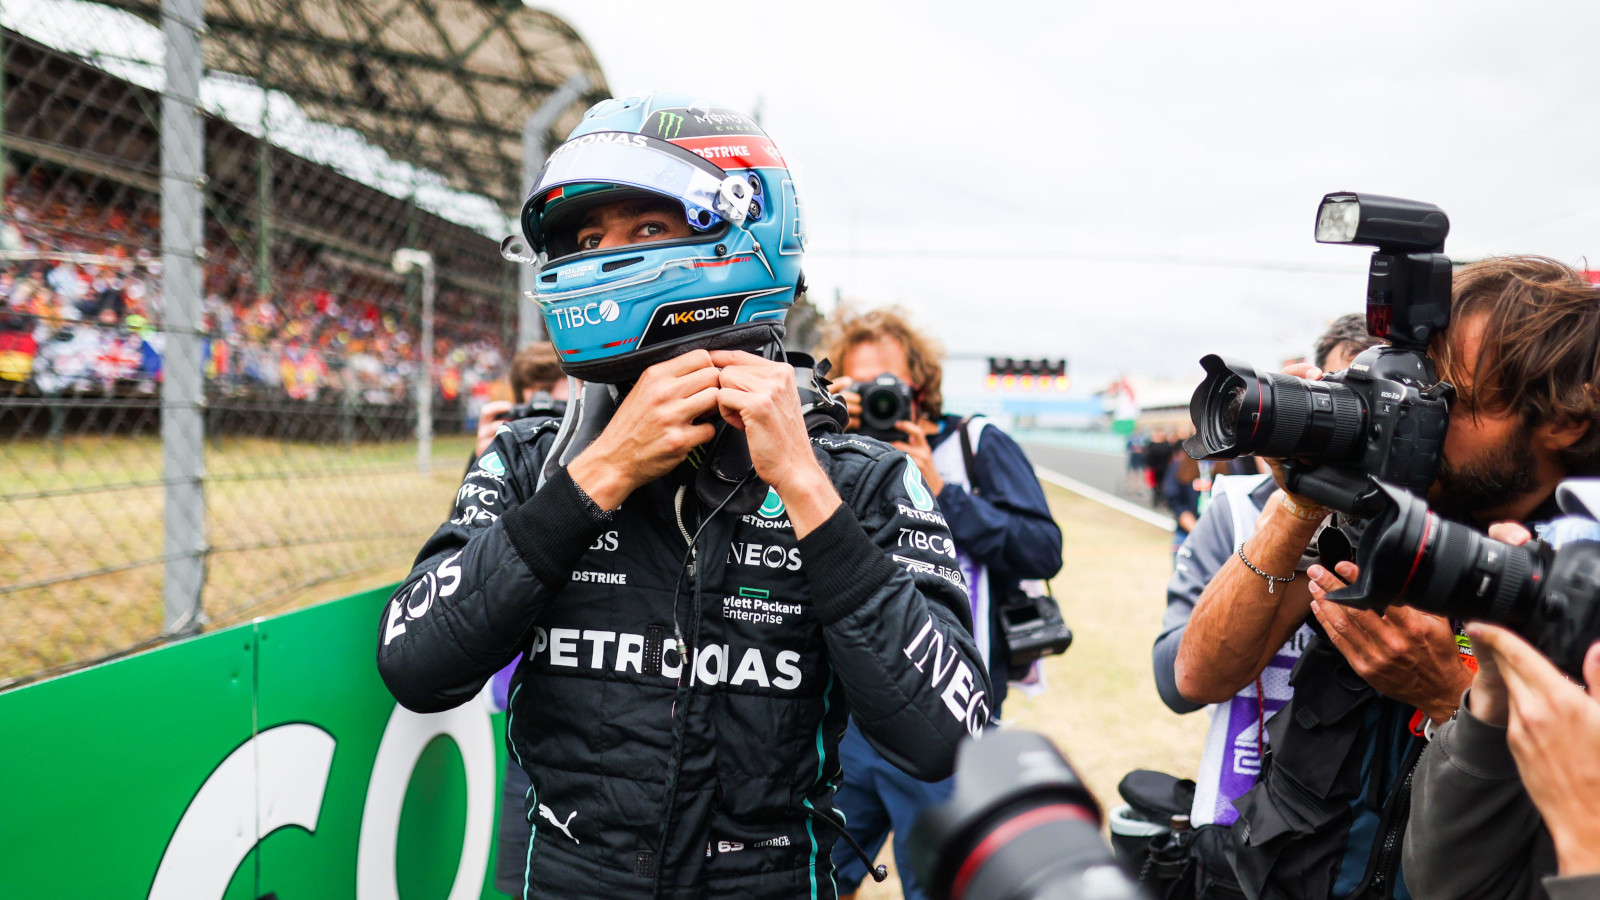 George Russell putting on his helmet on the grid surrounded by photographers. Hungary July 2022